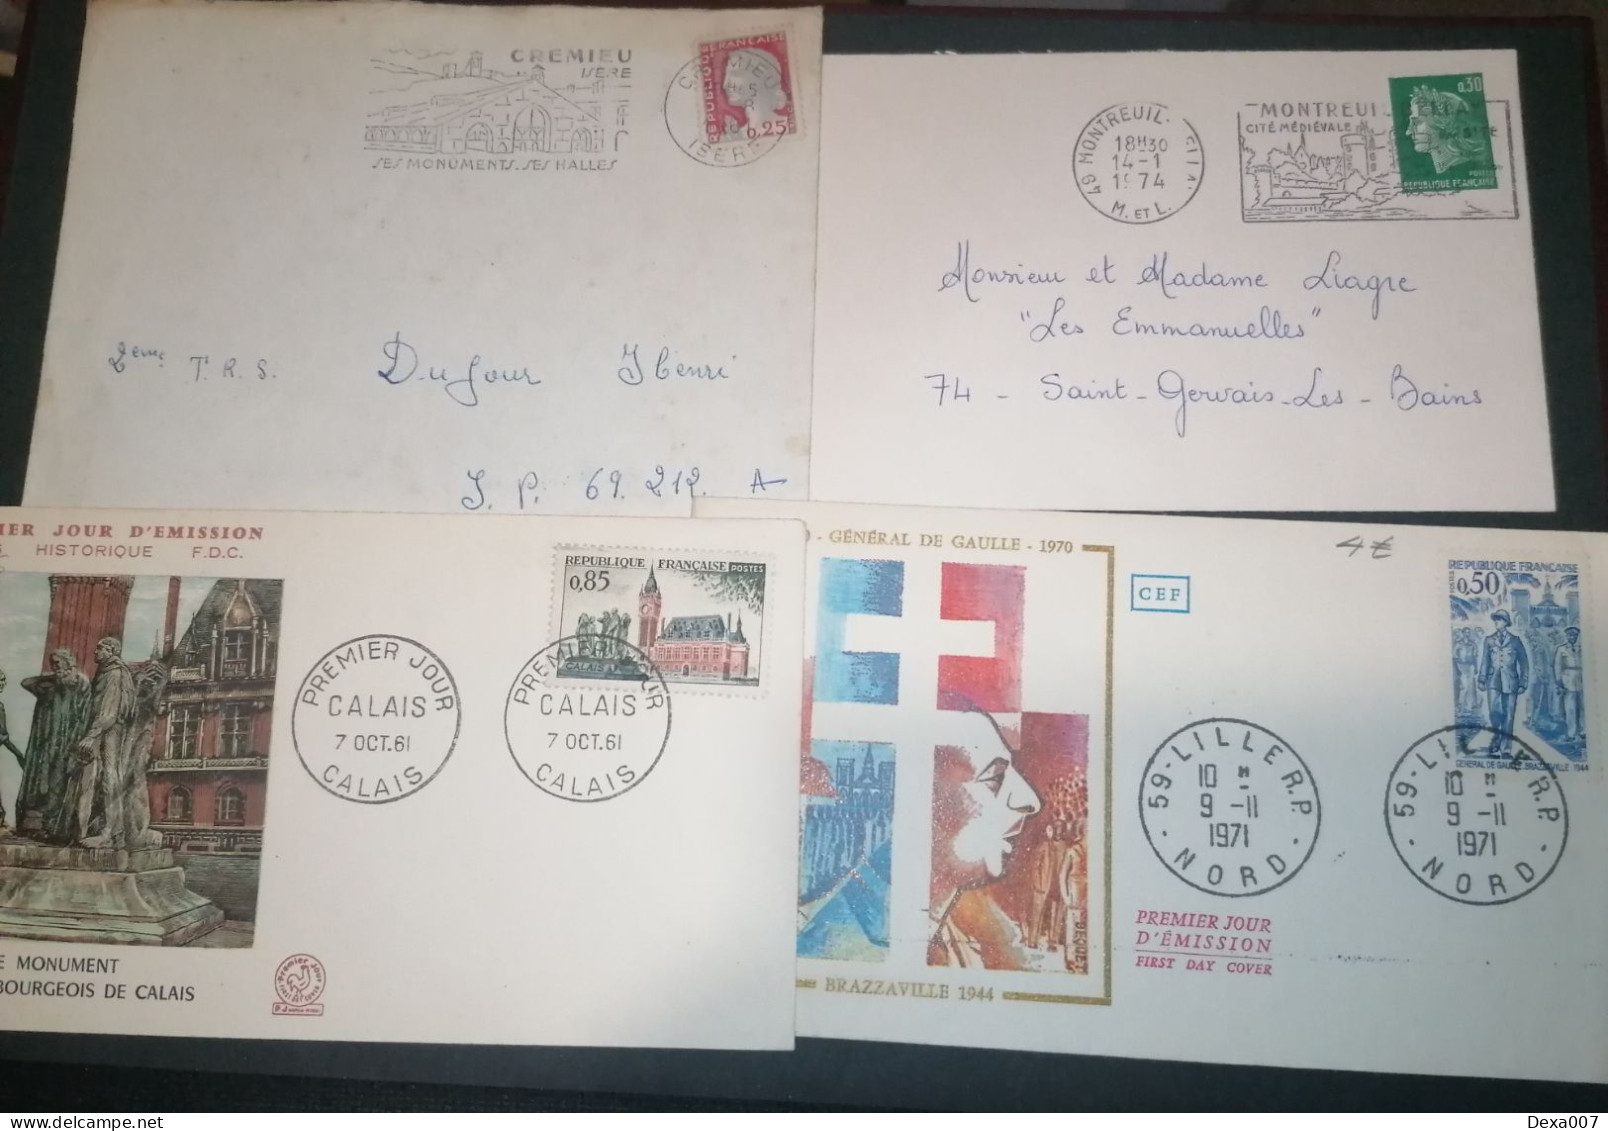 Carton box full of covers, fdc, military, postcards some stamps and more! see photos 3+ kilos